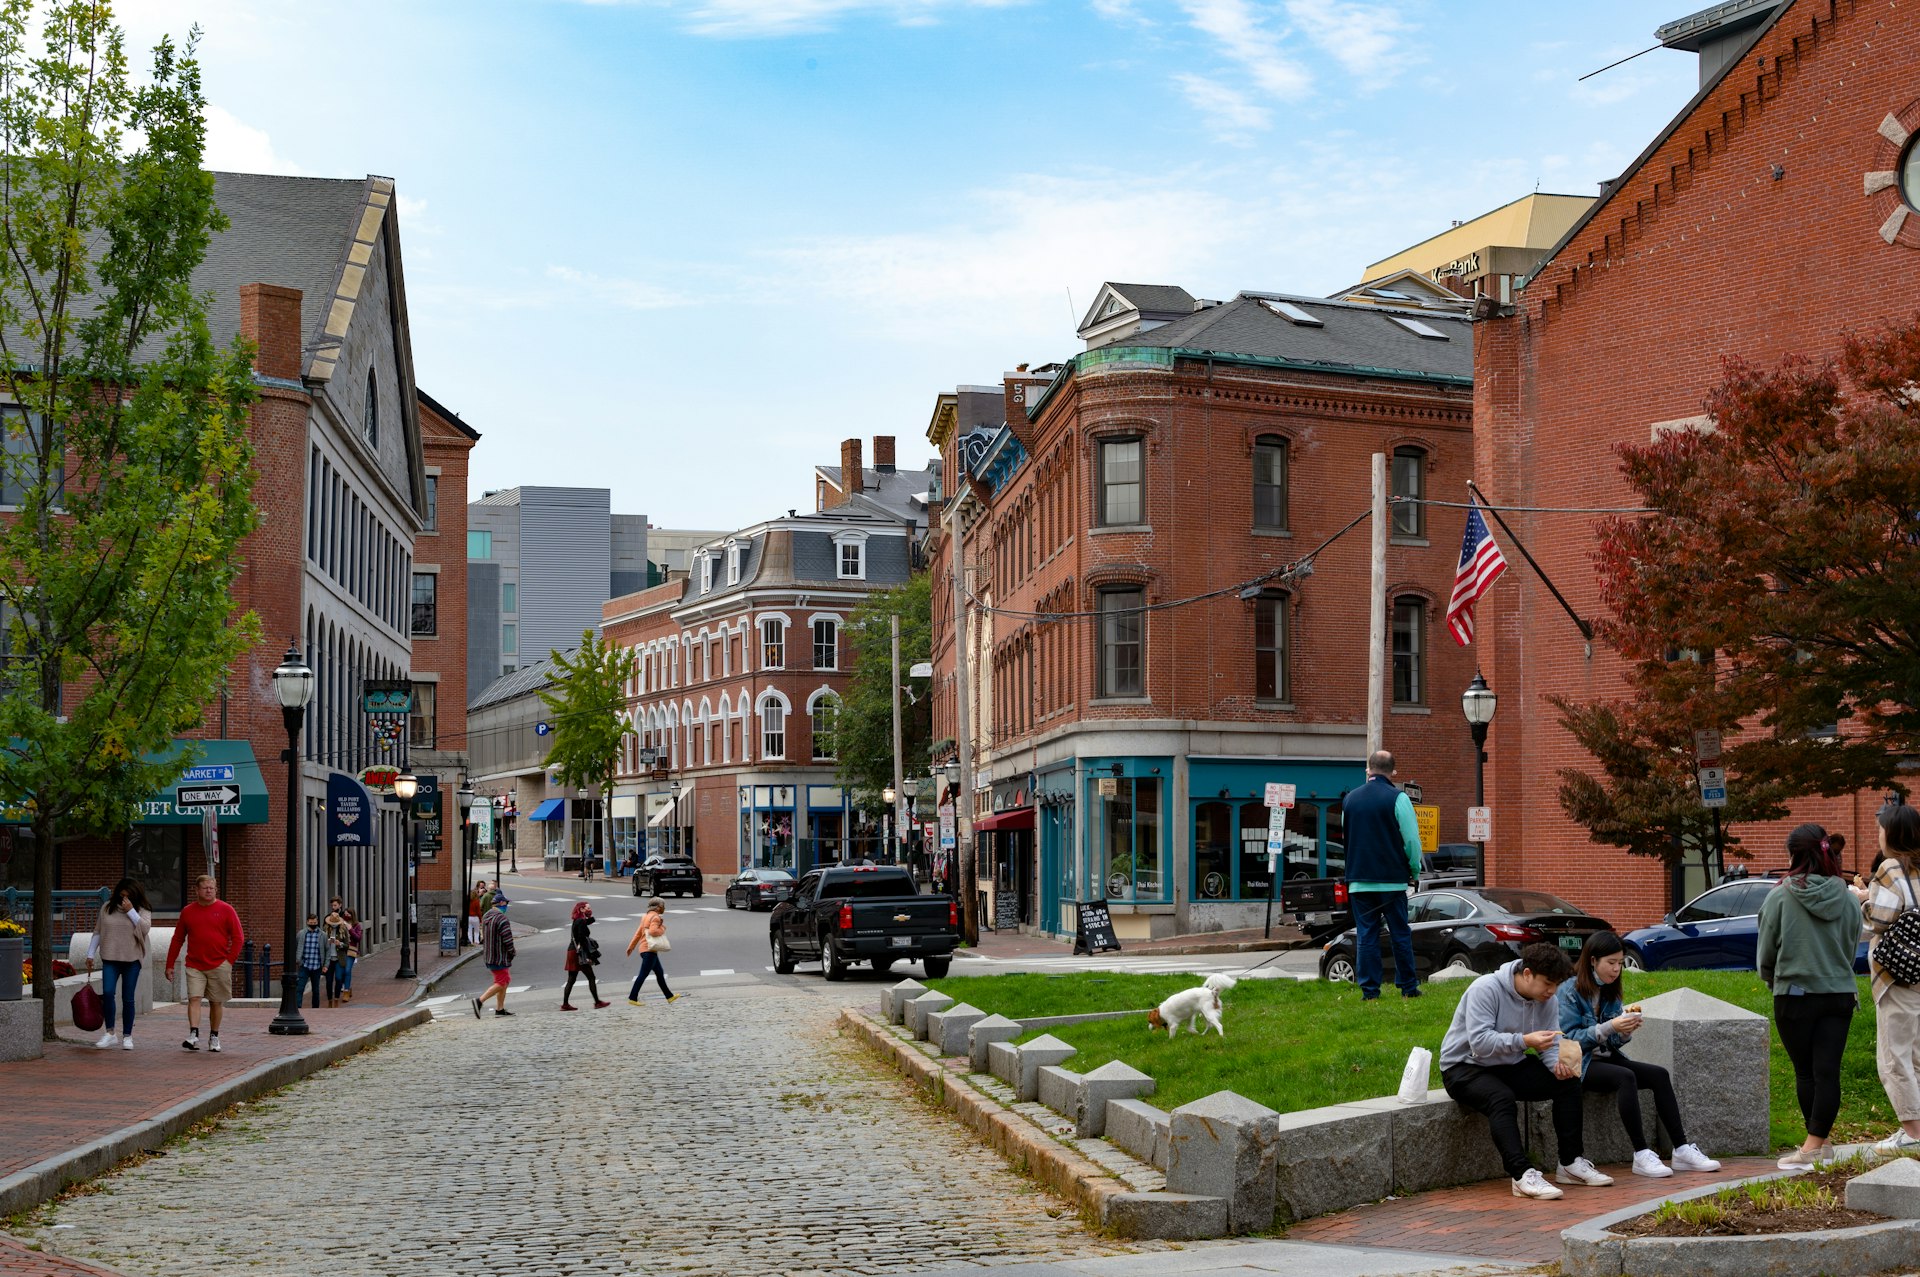 People walking around and hanging out in the Historic Waterfront District of Portland, Maine, with cobblestone streets and red-brick buildings.